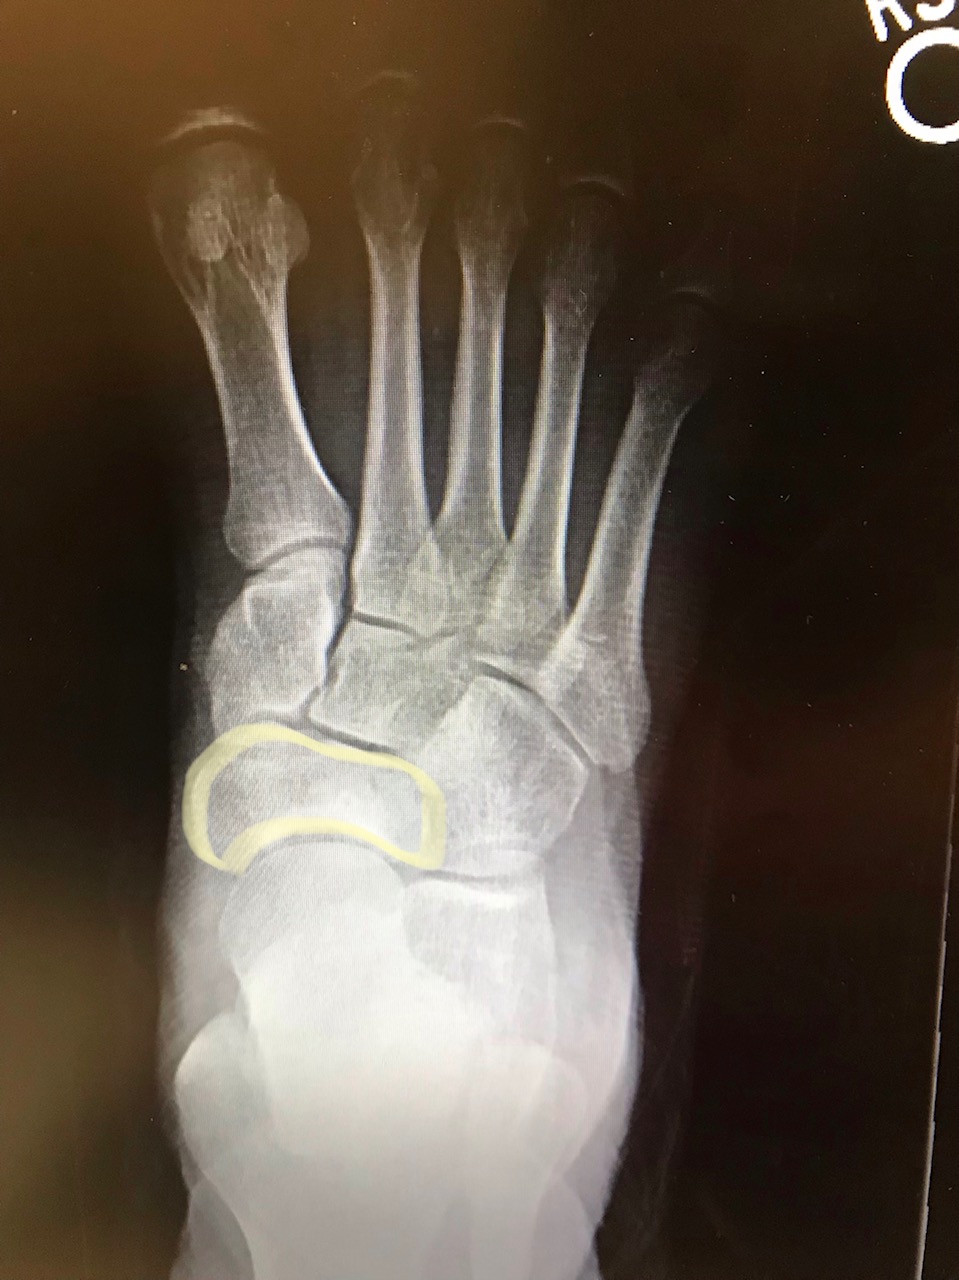 Navicular bone:
Right foot radiograph with navicular bone highlighted in yellow.